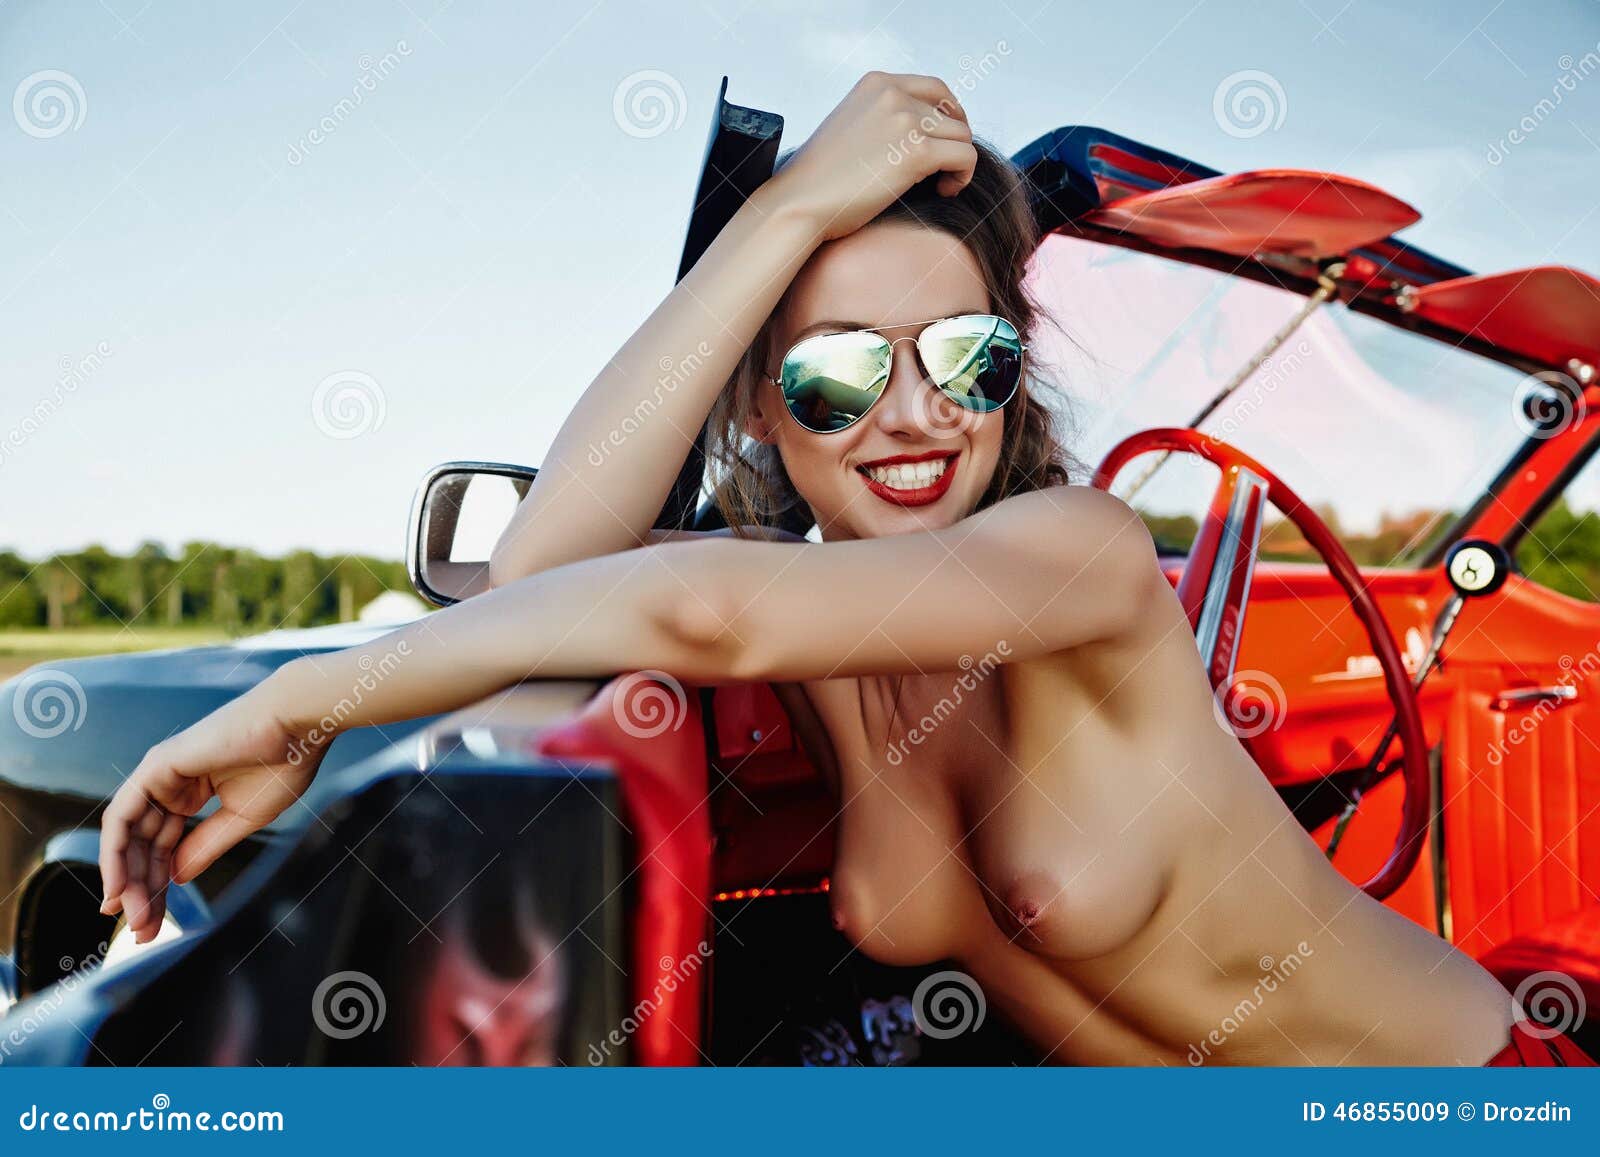 Best of Topless girls and cars